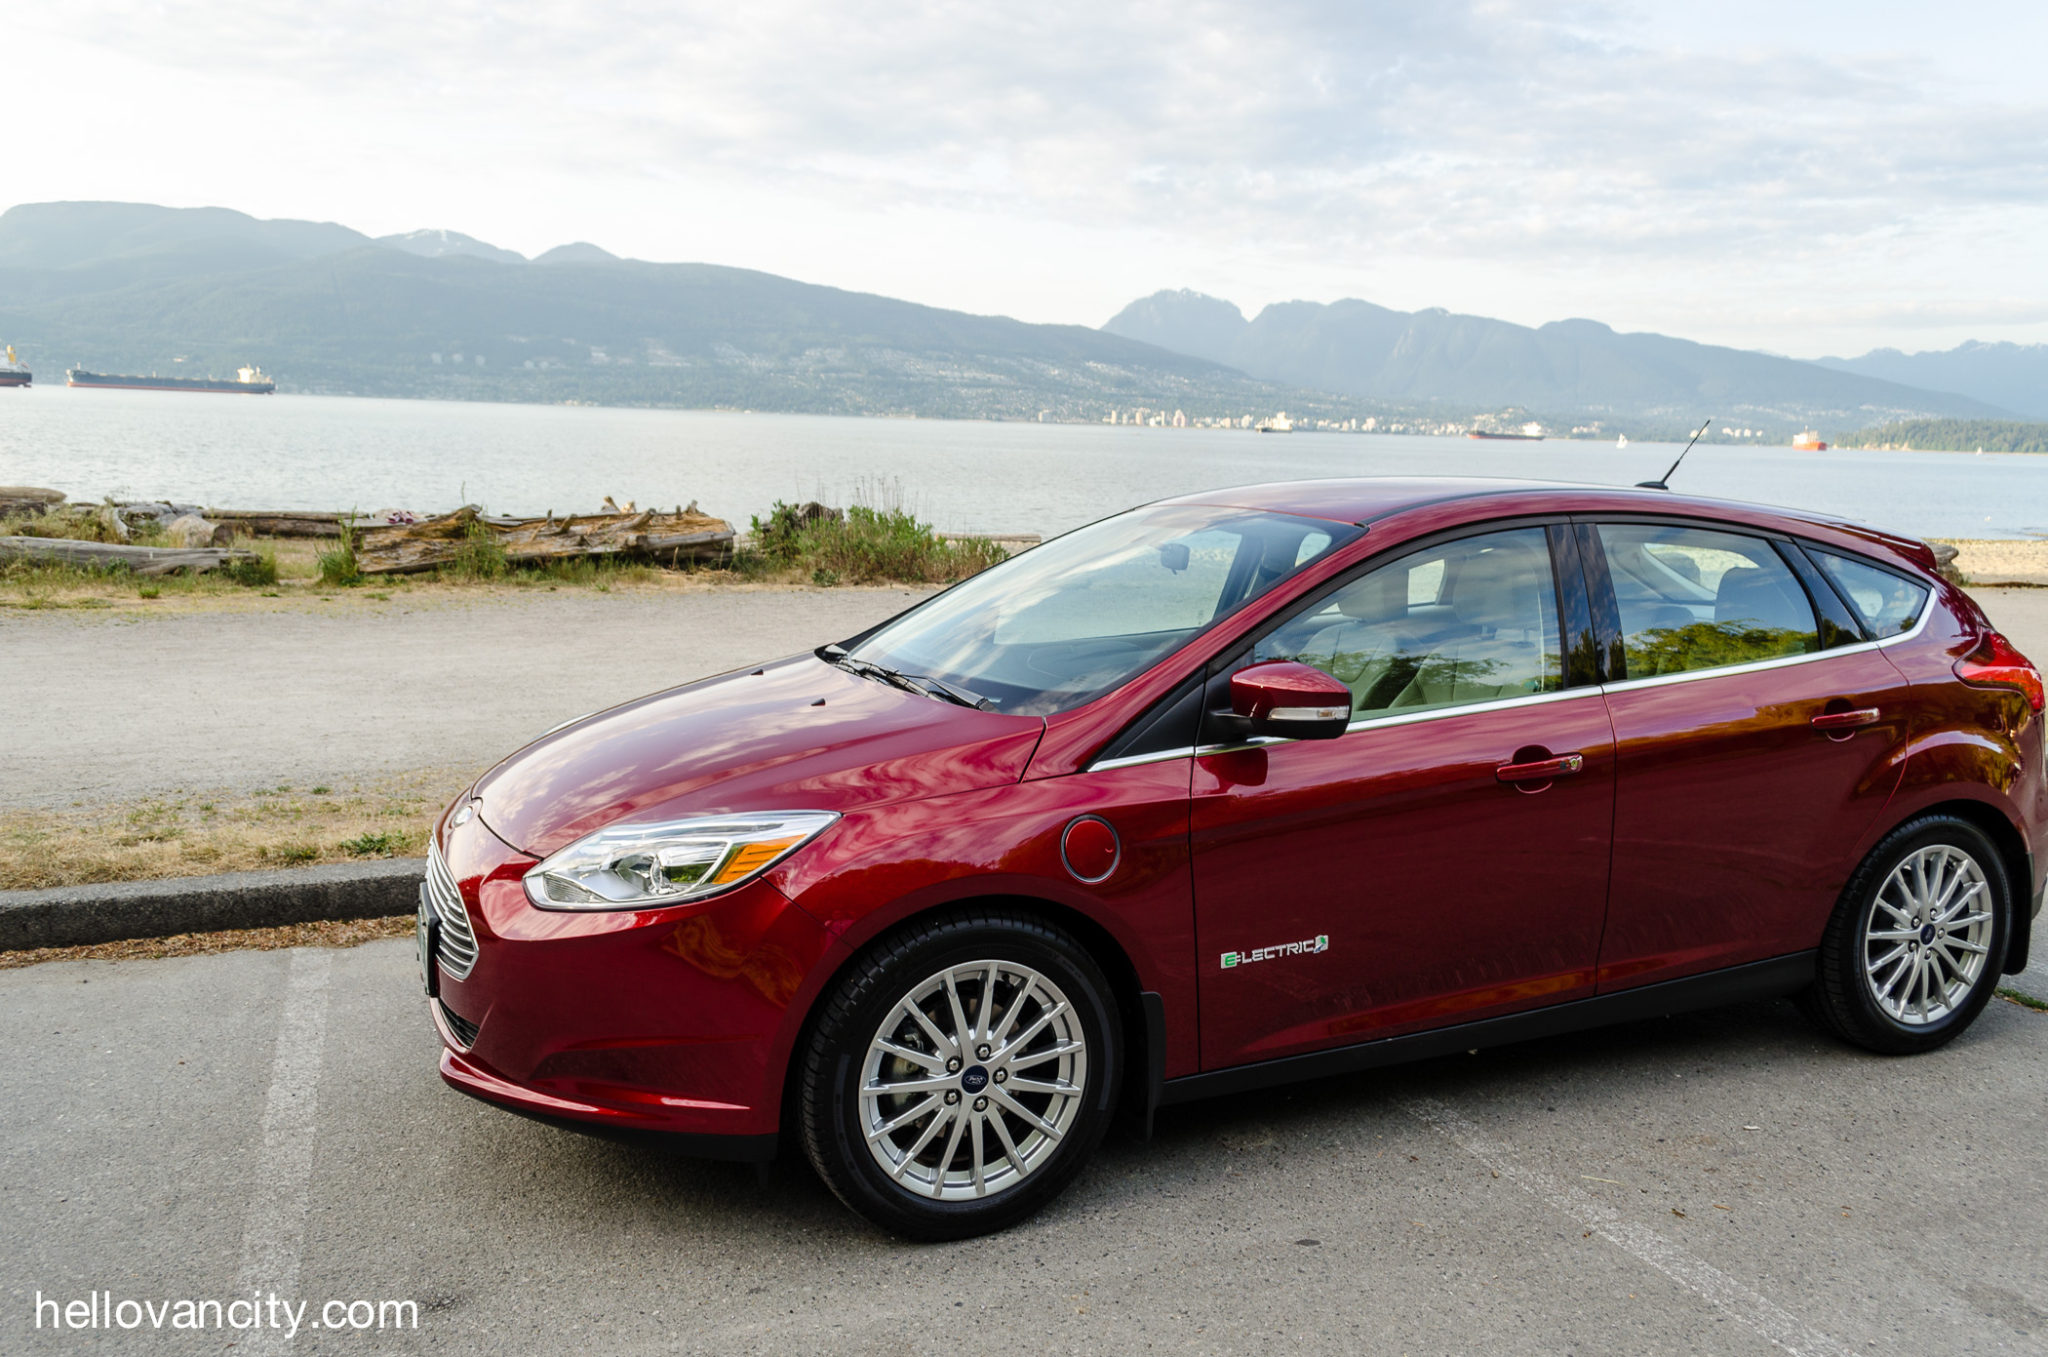 Review: 2016 Ford Focus Electric - Hello Vancity